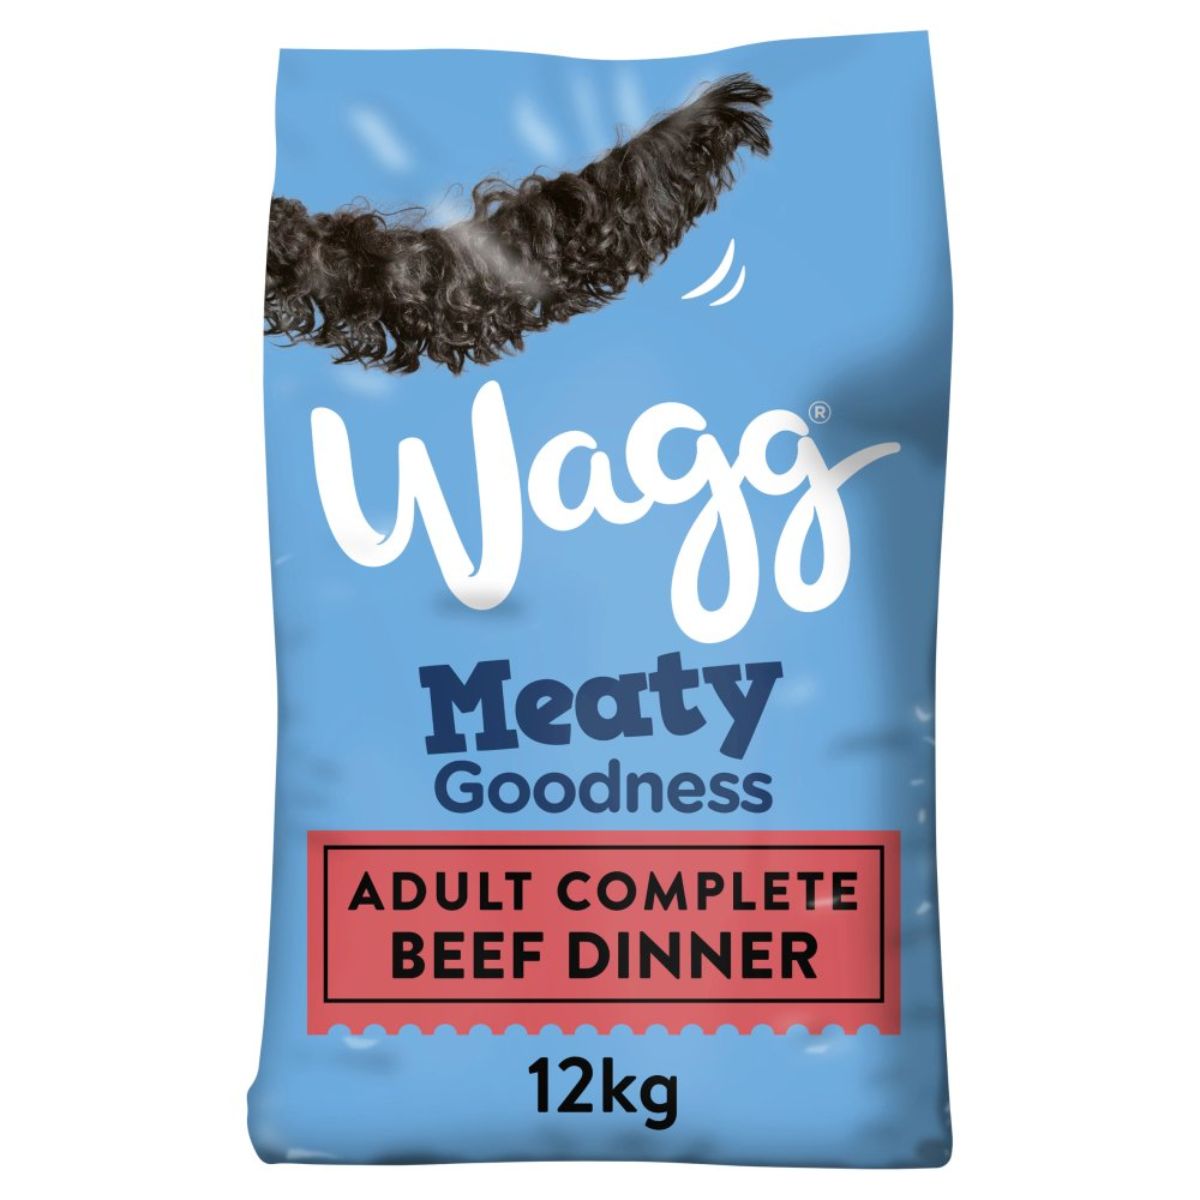 Wagg - Meaty Goodness Adult Complete Beef Dinner - 12kg